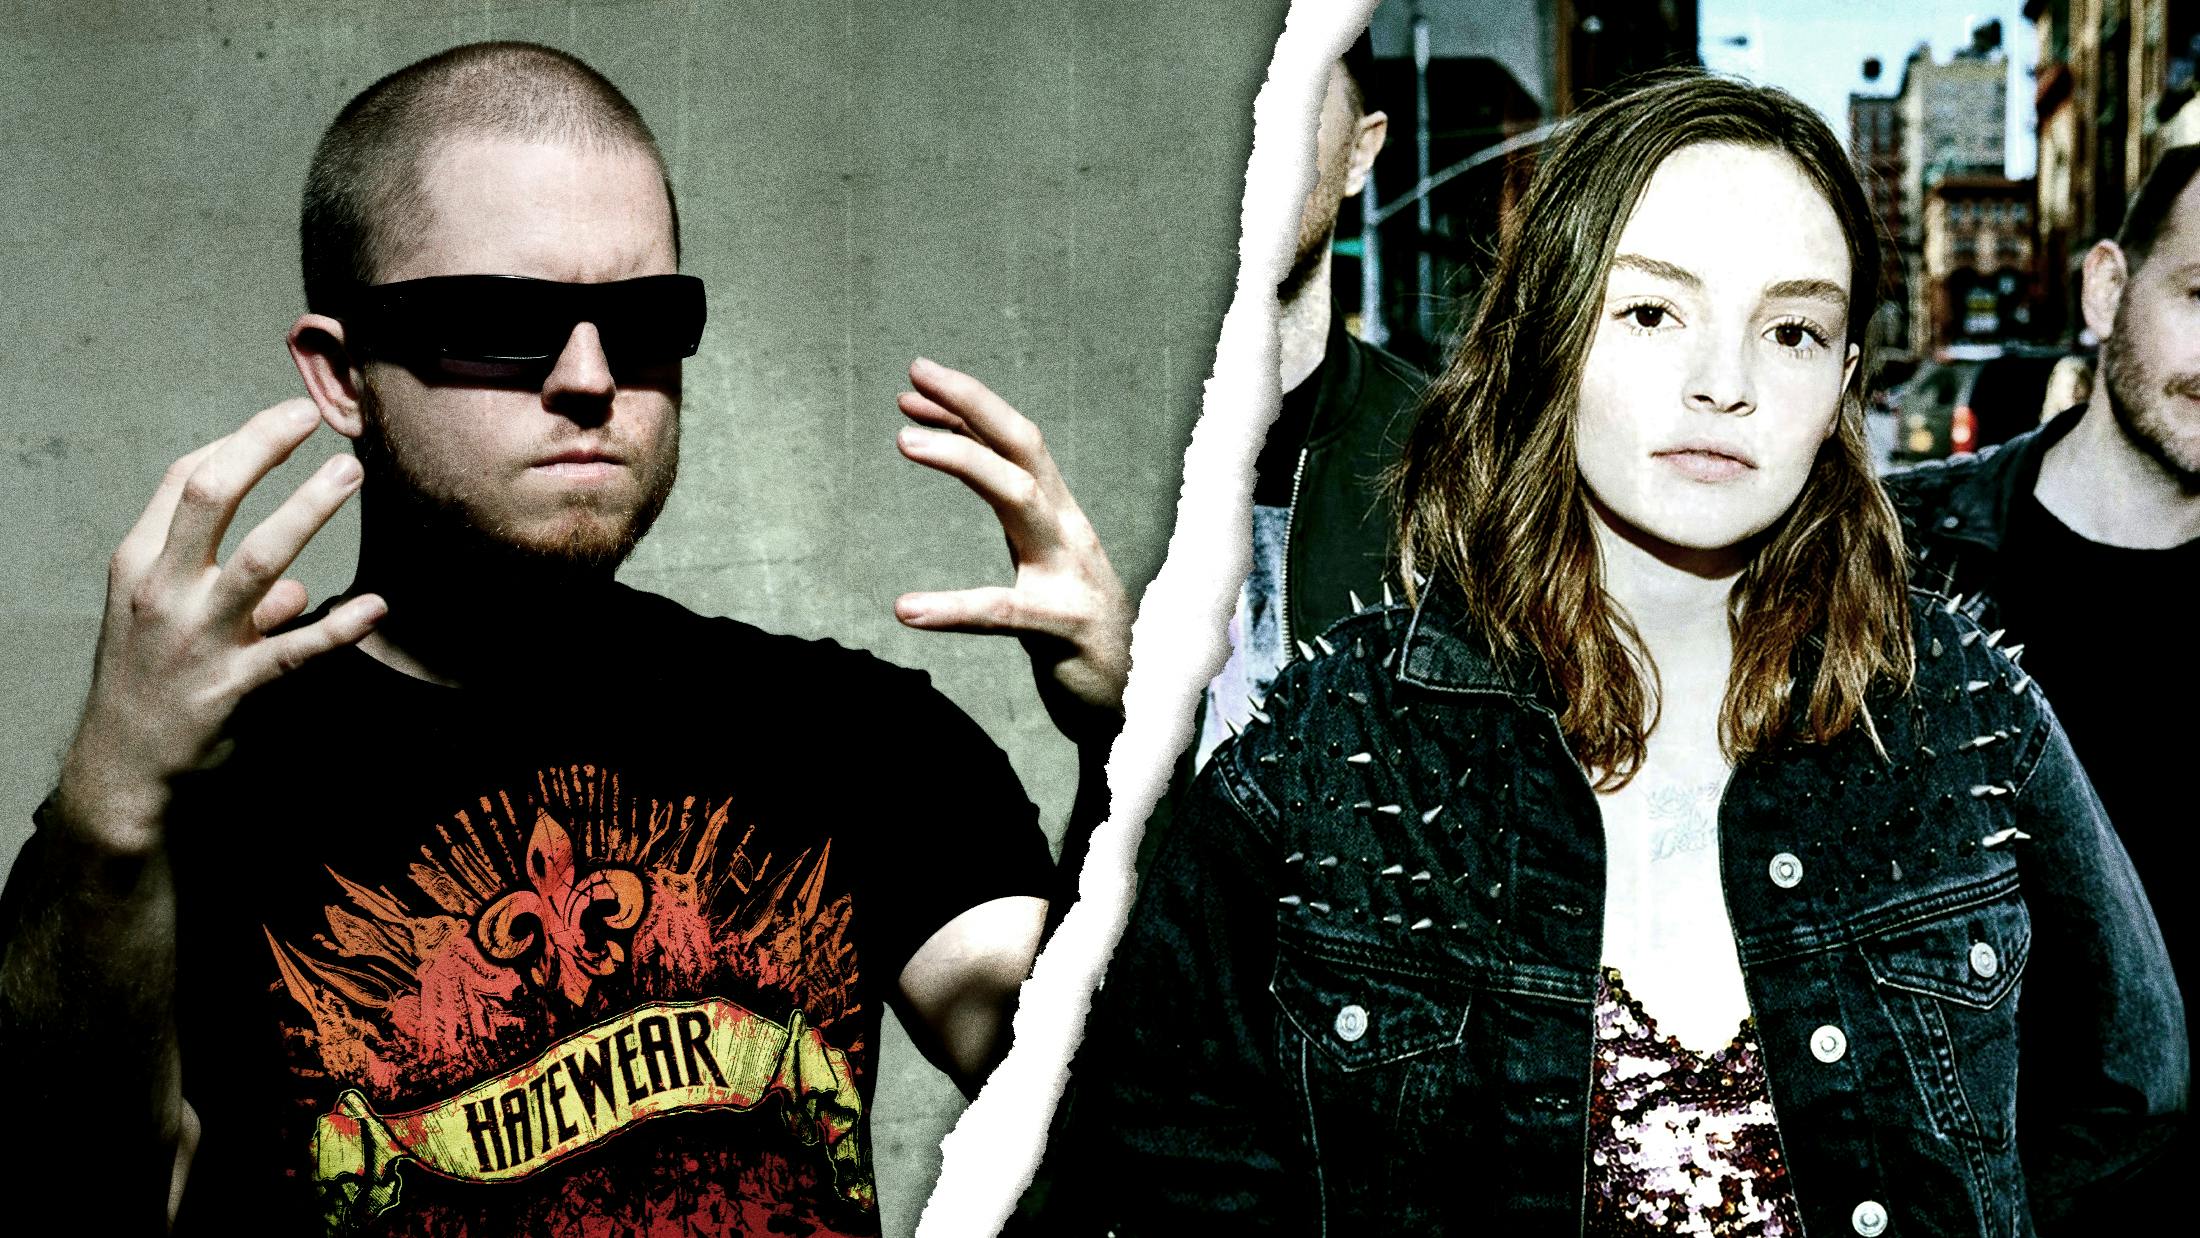 Gojira Sent CHVRCHES A Care Package After The Jamey Jasta Twitter Spat